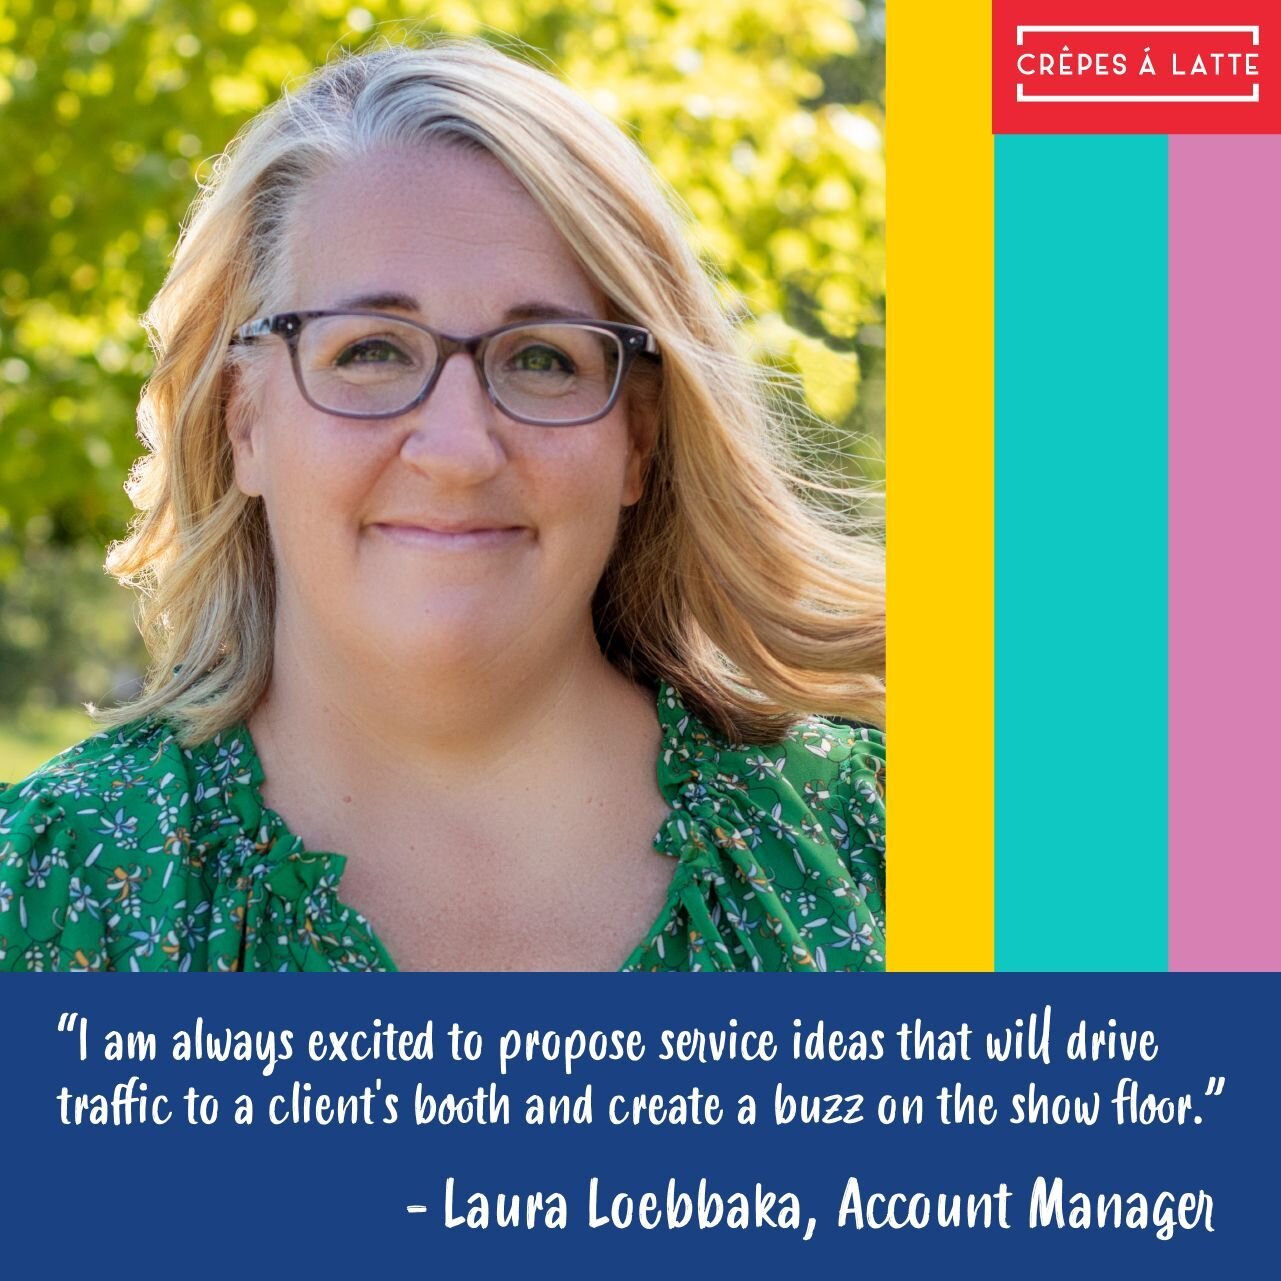 With 19 years of experience in the hospitality industry, Laura is one of our hardest working team members at CAL. We're so fortunate to have her with us! #liveevents #tradeshows #clientrelations